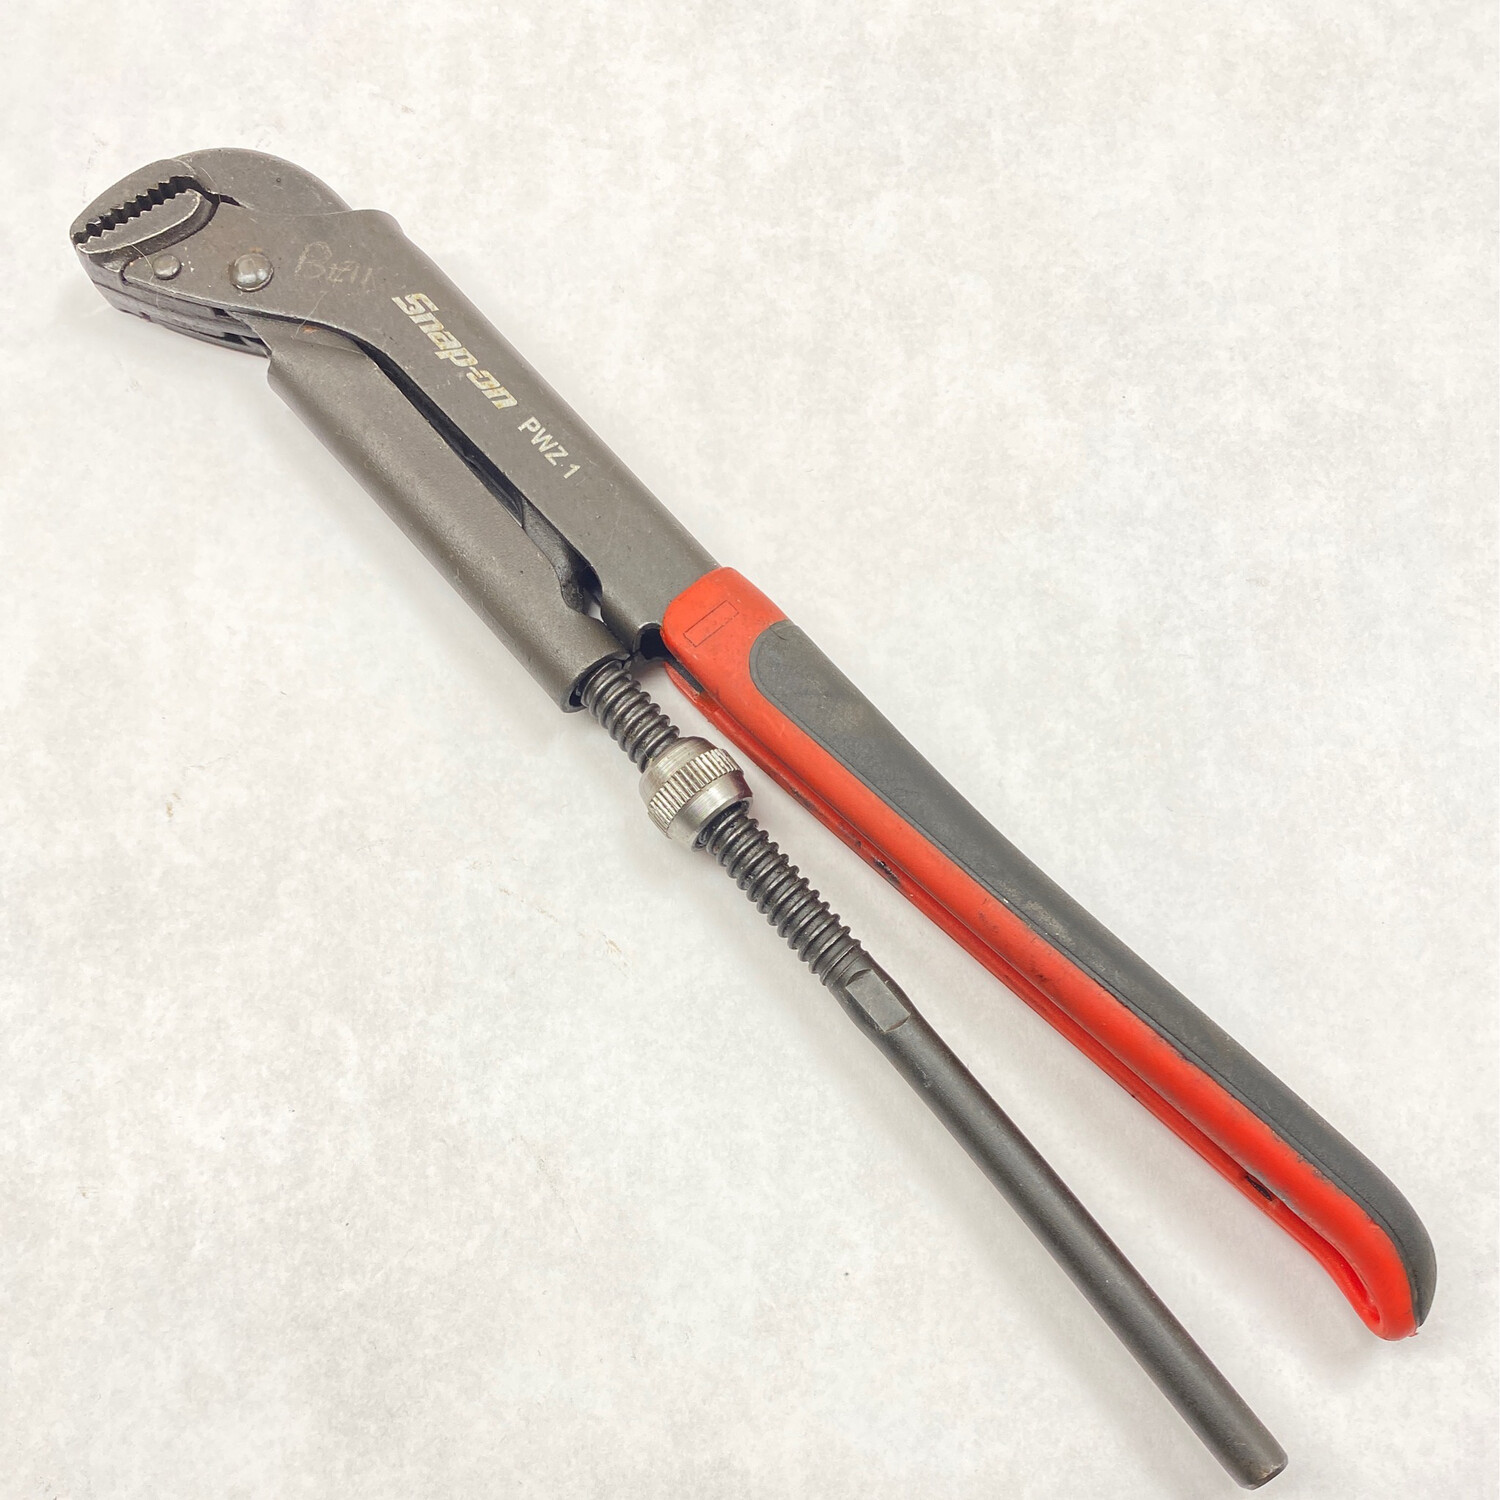 Snap On 12 1/2” Quick Adjust Plier Wrench, PWZ1